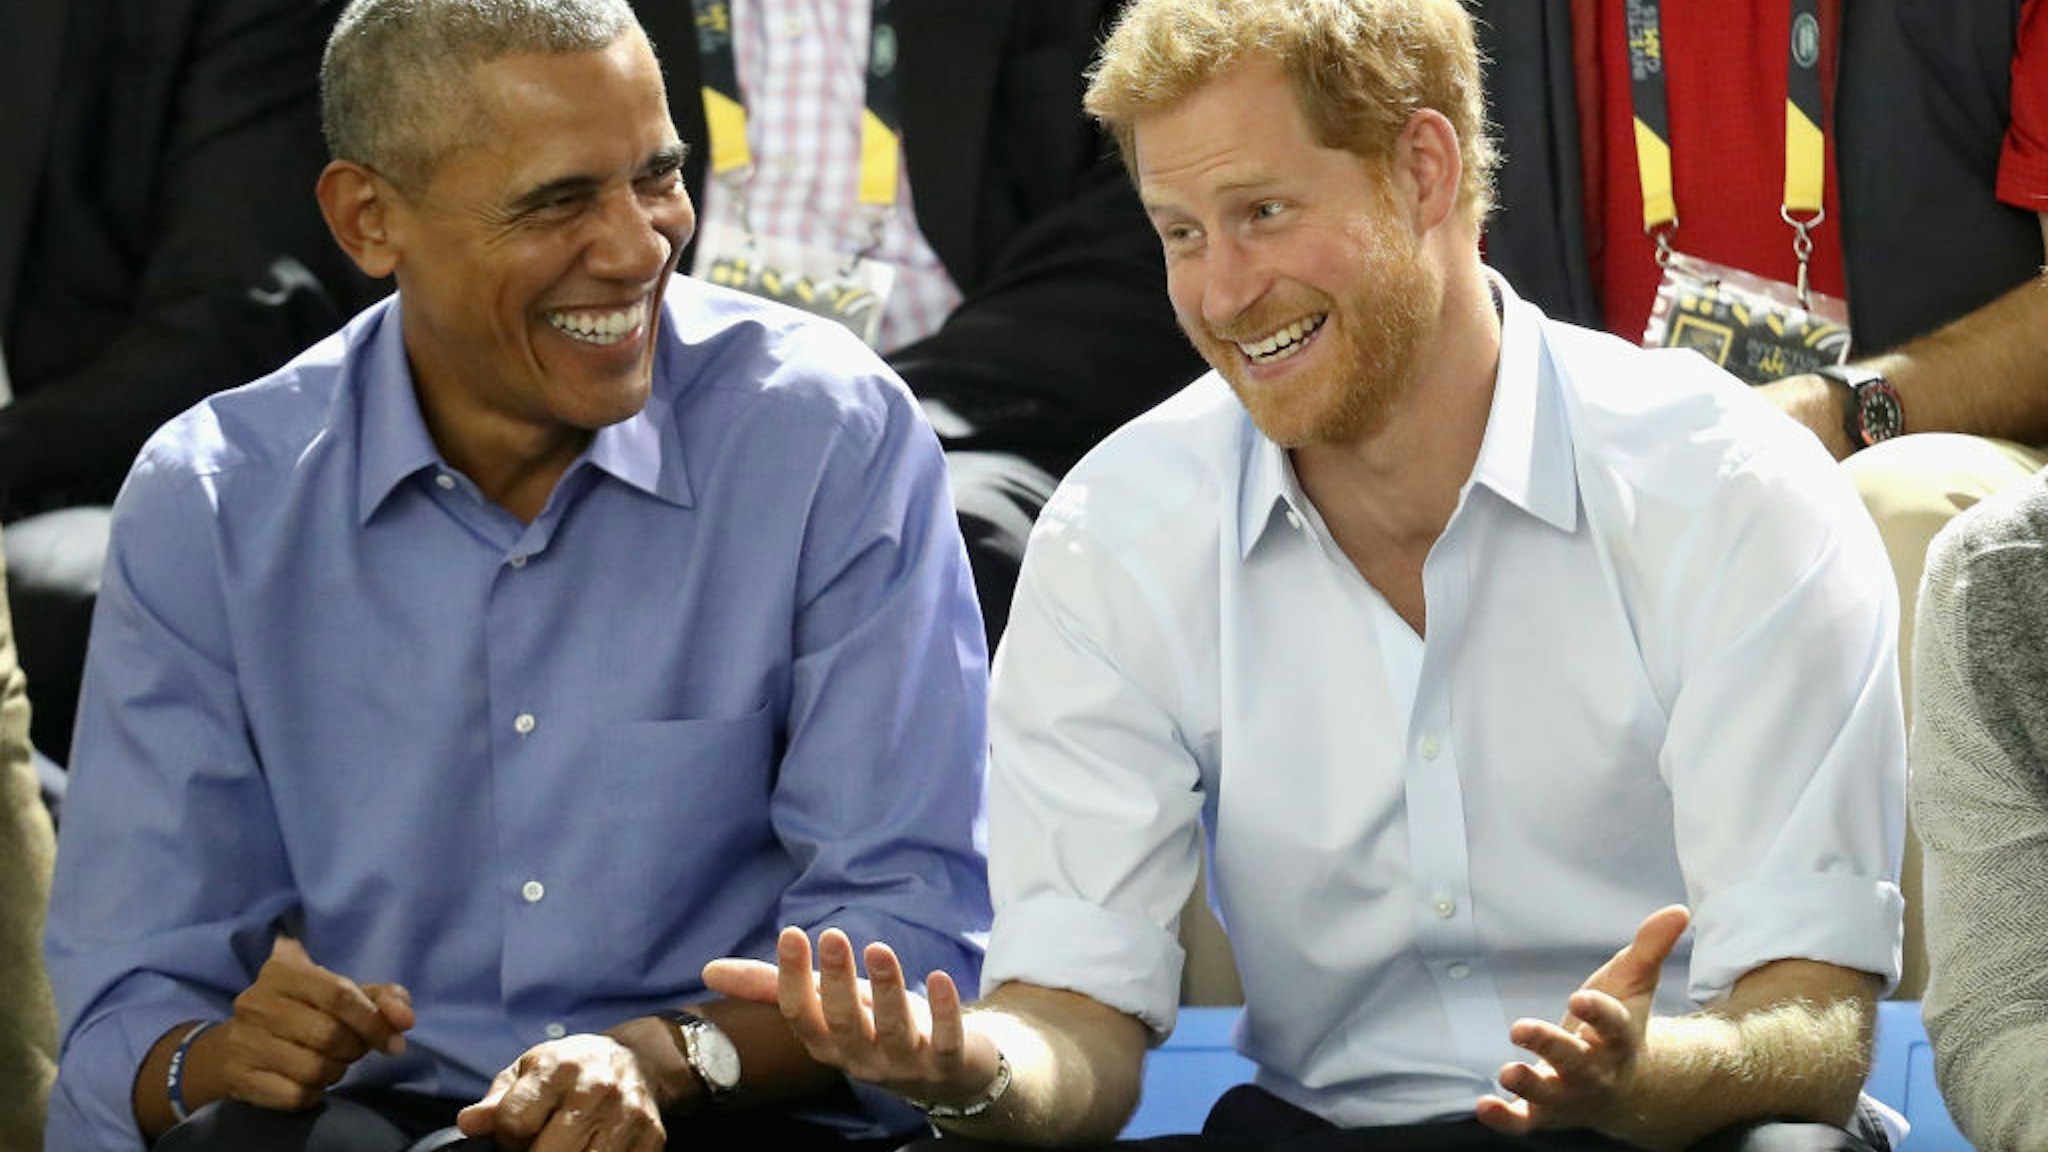 Former U.S. President Barack Obama and Prince Harry share a joke as they watch wheelchair baskeball on day 7 of the Invictus Games 2017 on September 29, 2017 in Toronto, Canada